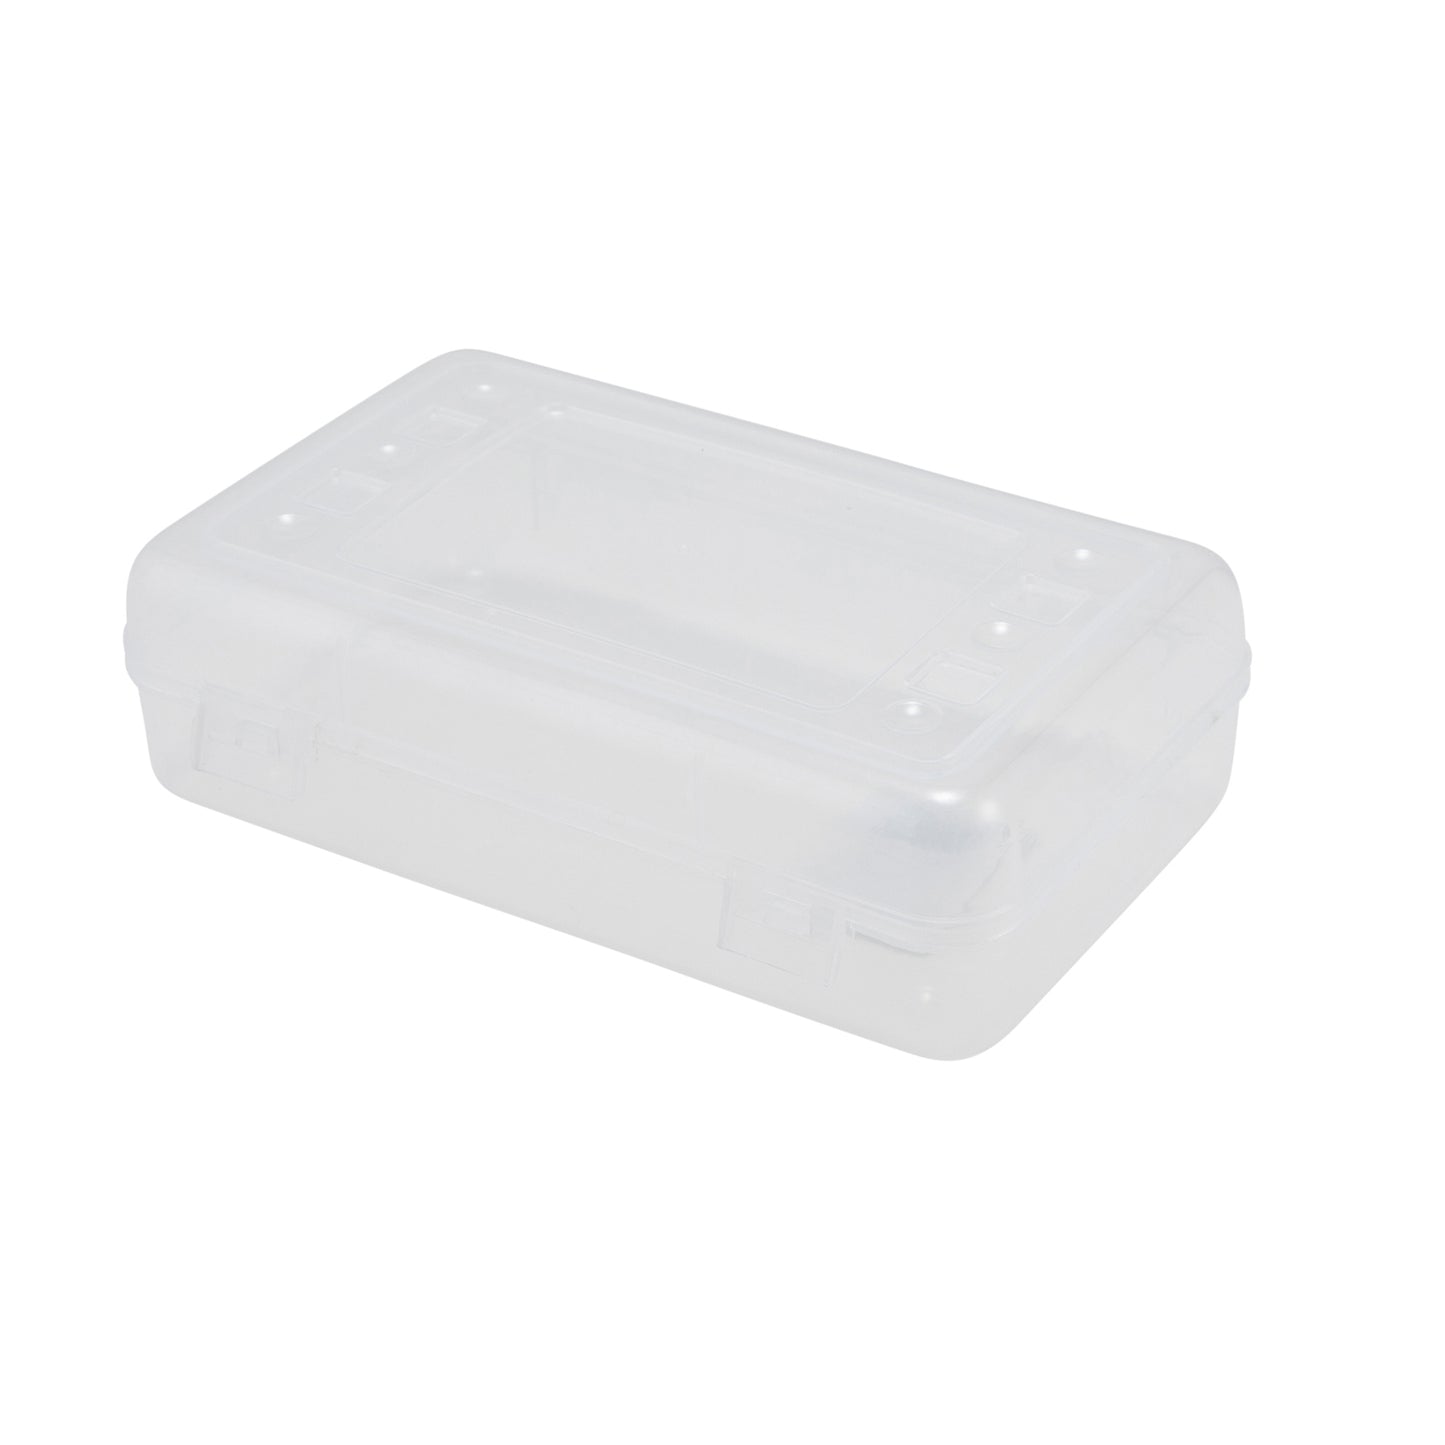 6 Pack Plastic Pencil Box Clear Utility Pencil Storage Case Office Supplies